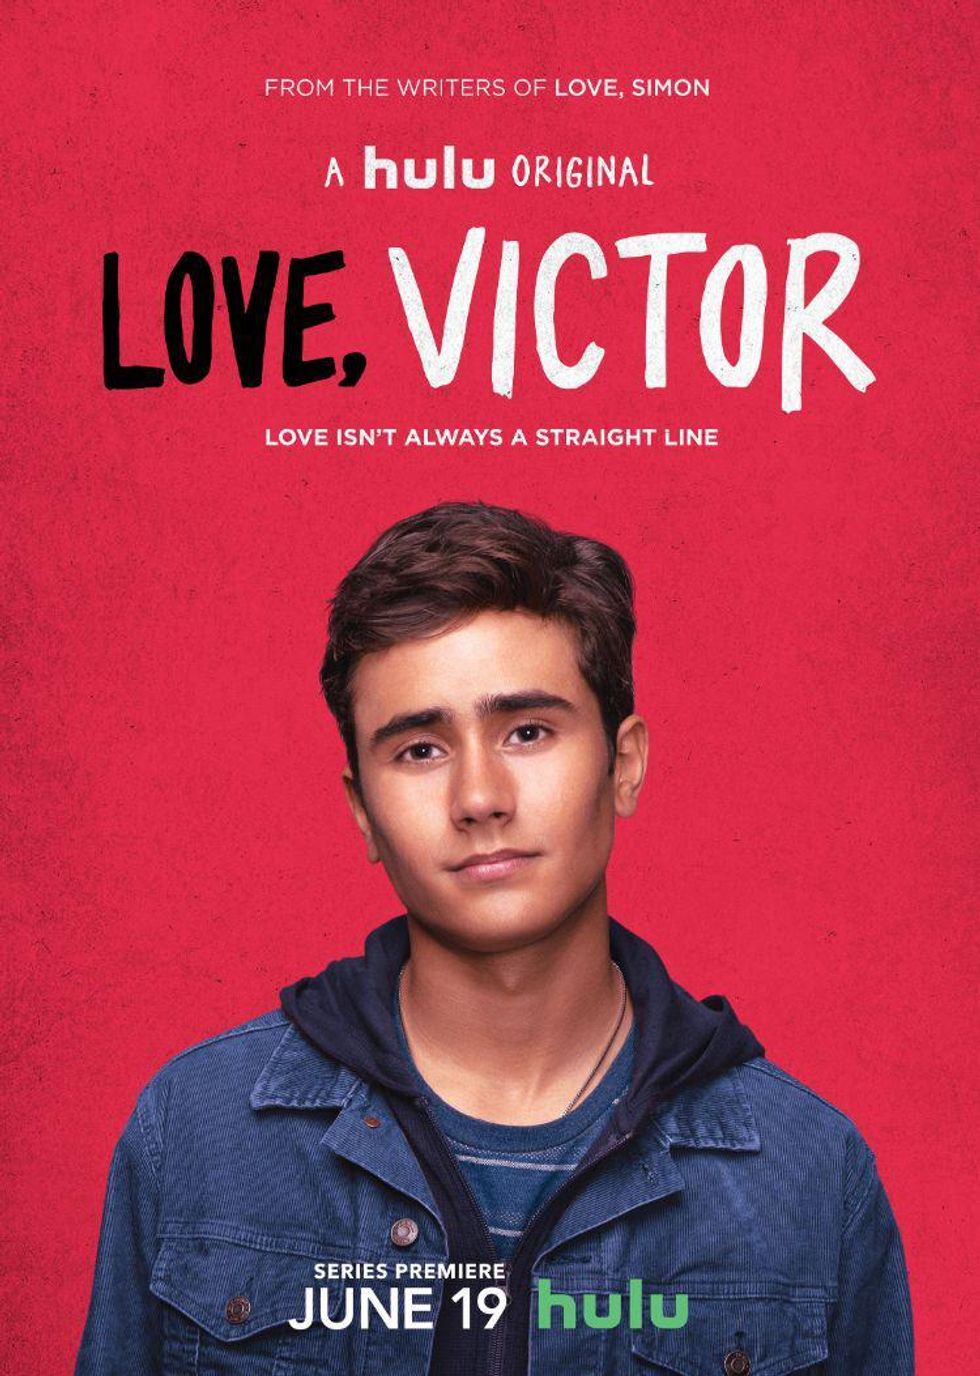 The Official 'Love, Victor' Trailer Is Giving Us All the Feels!